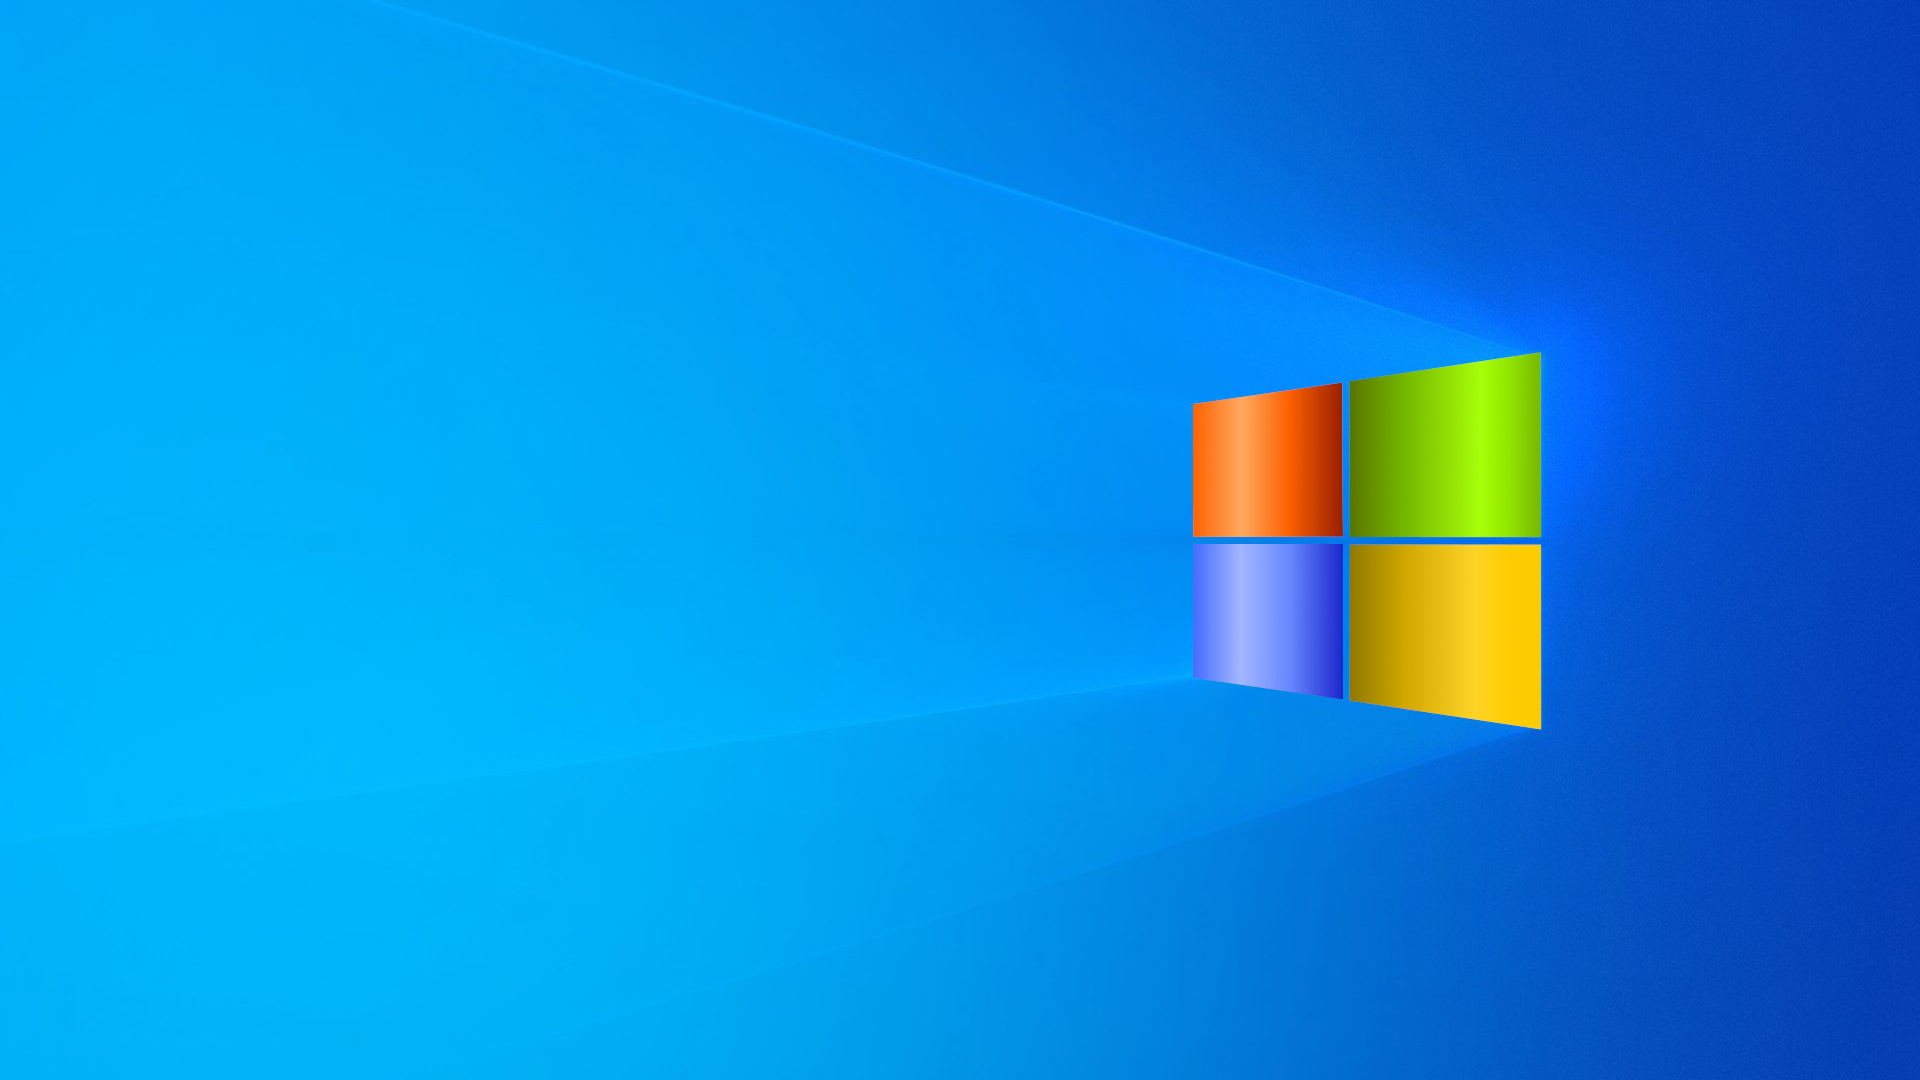 Win 10 19H1 wallpaper with XP logo